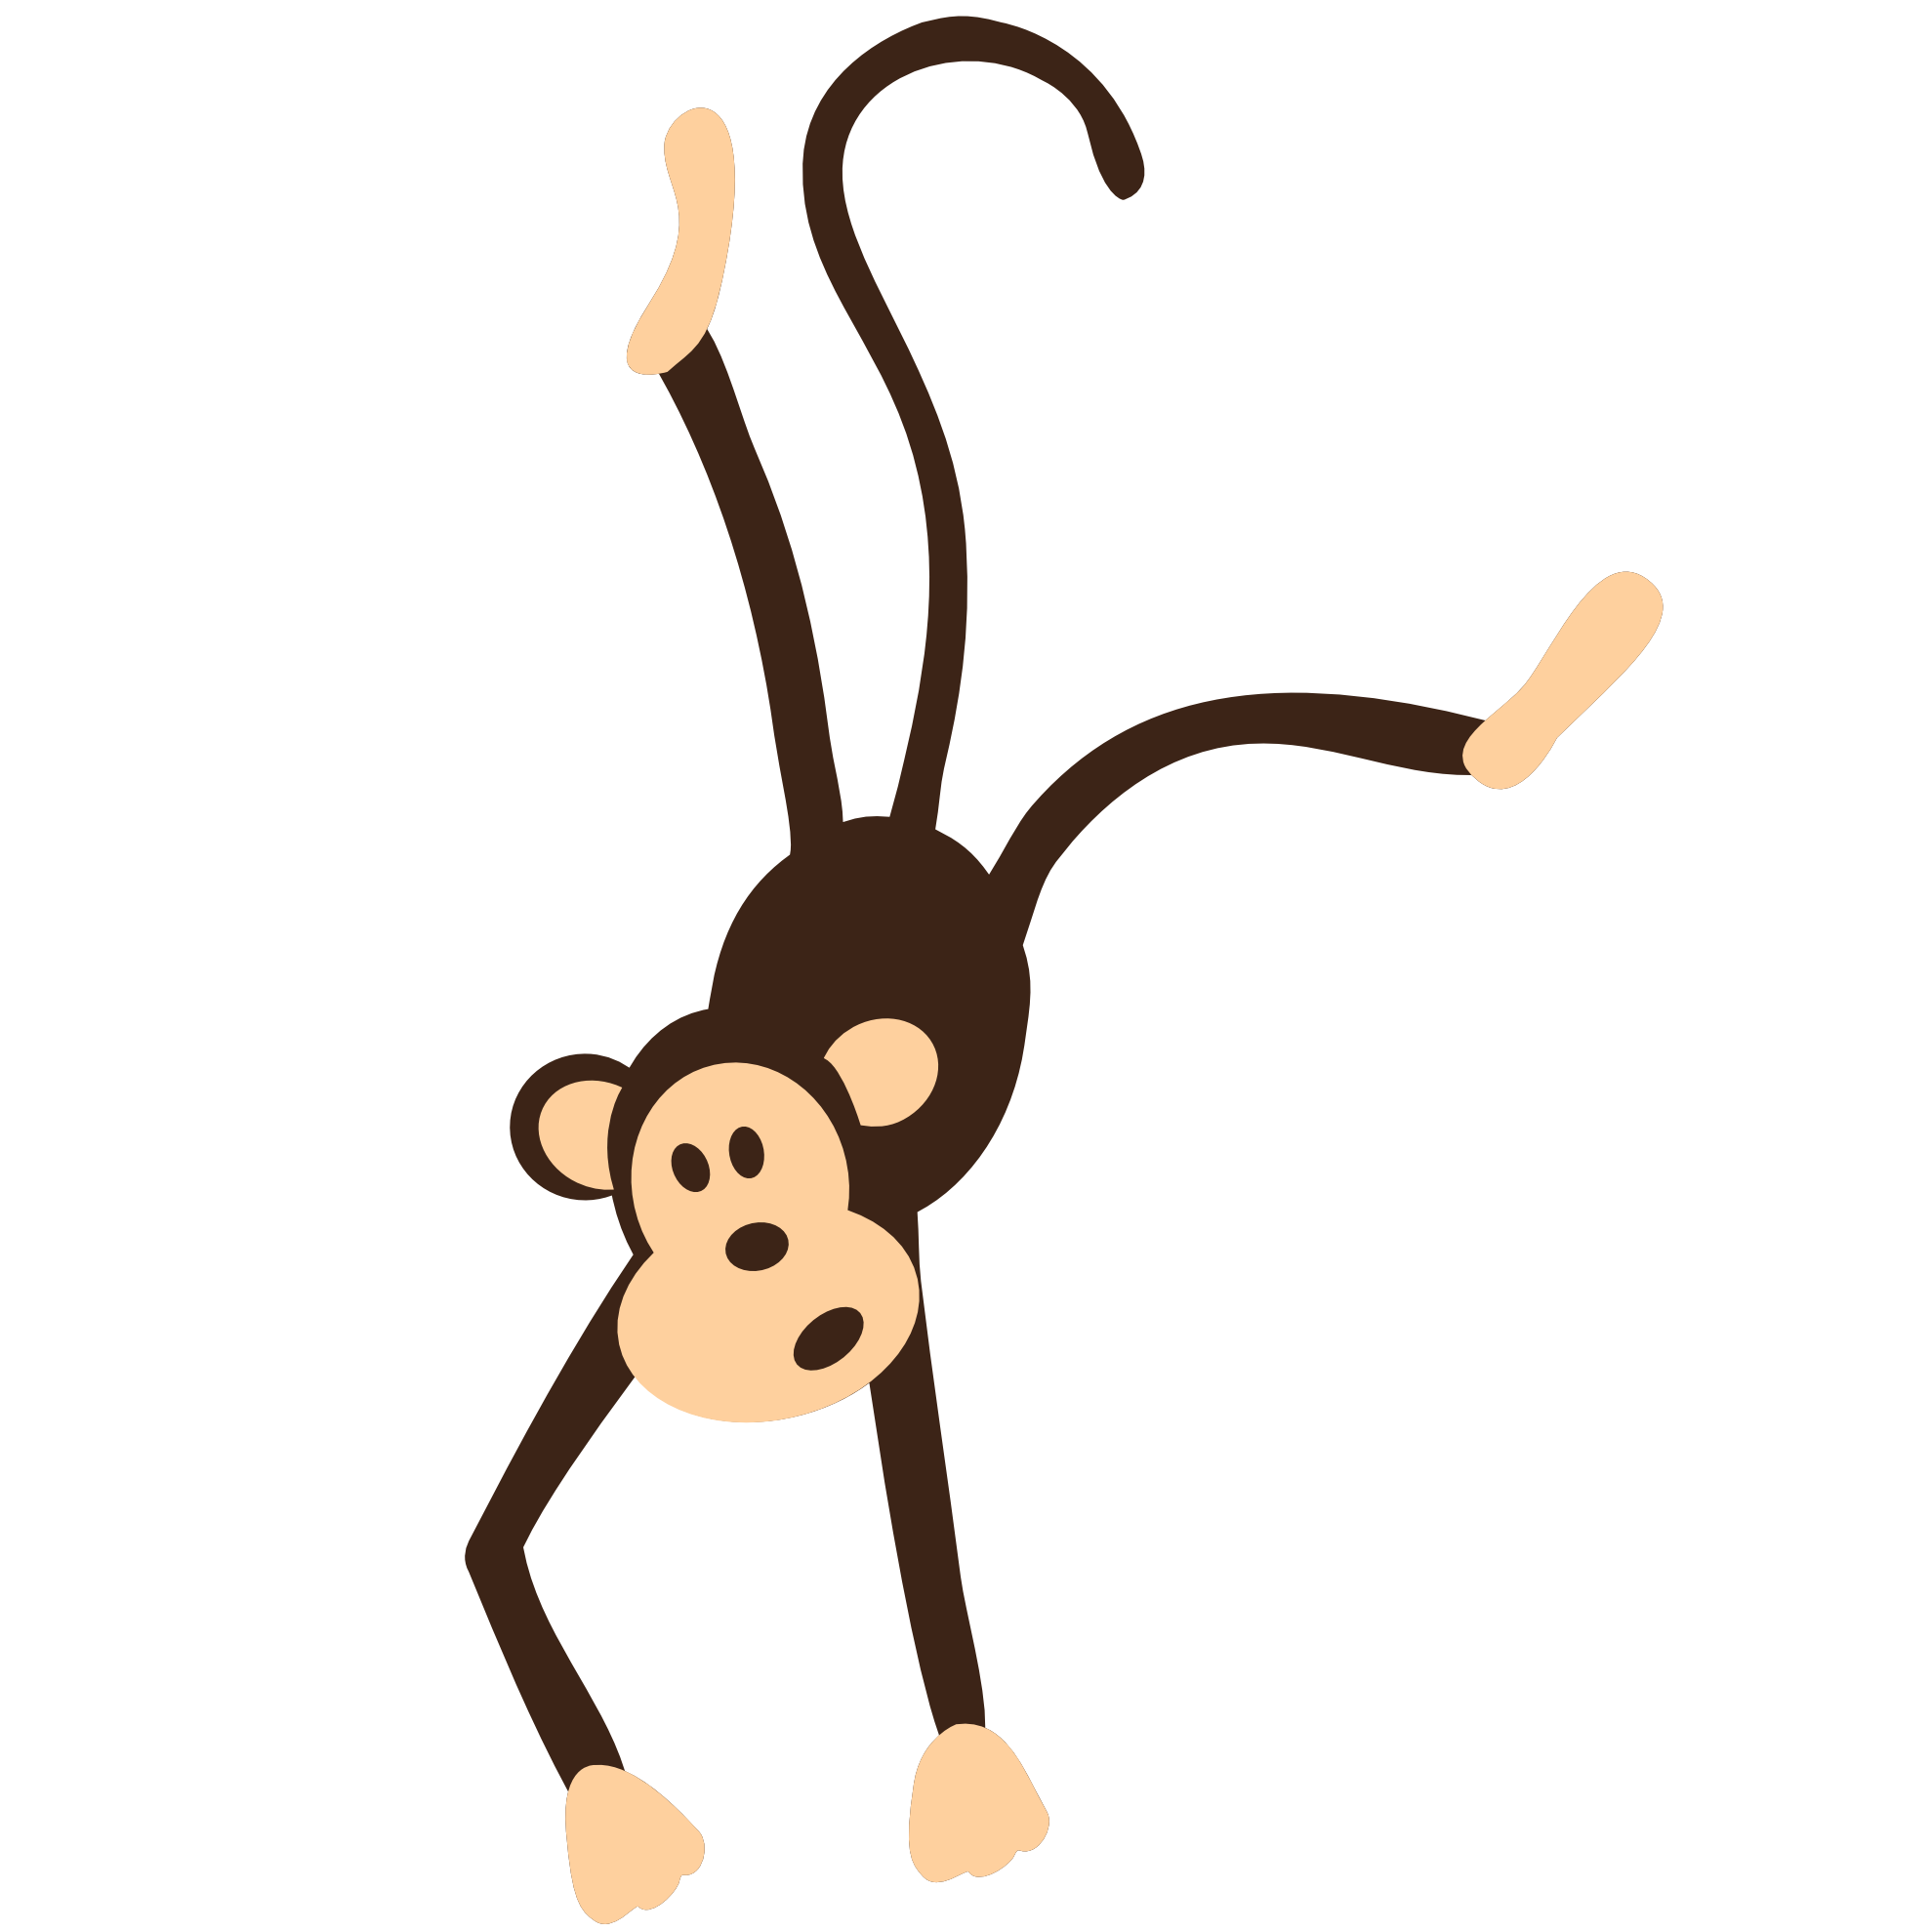 Monkey Png Png Image - Monkey, Transparent background PNG HD thumbnail